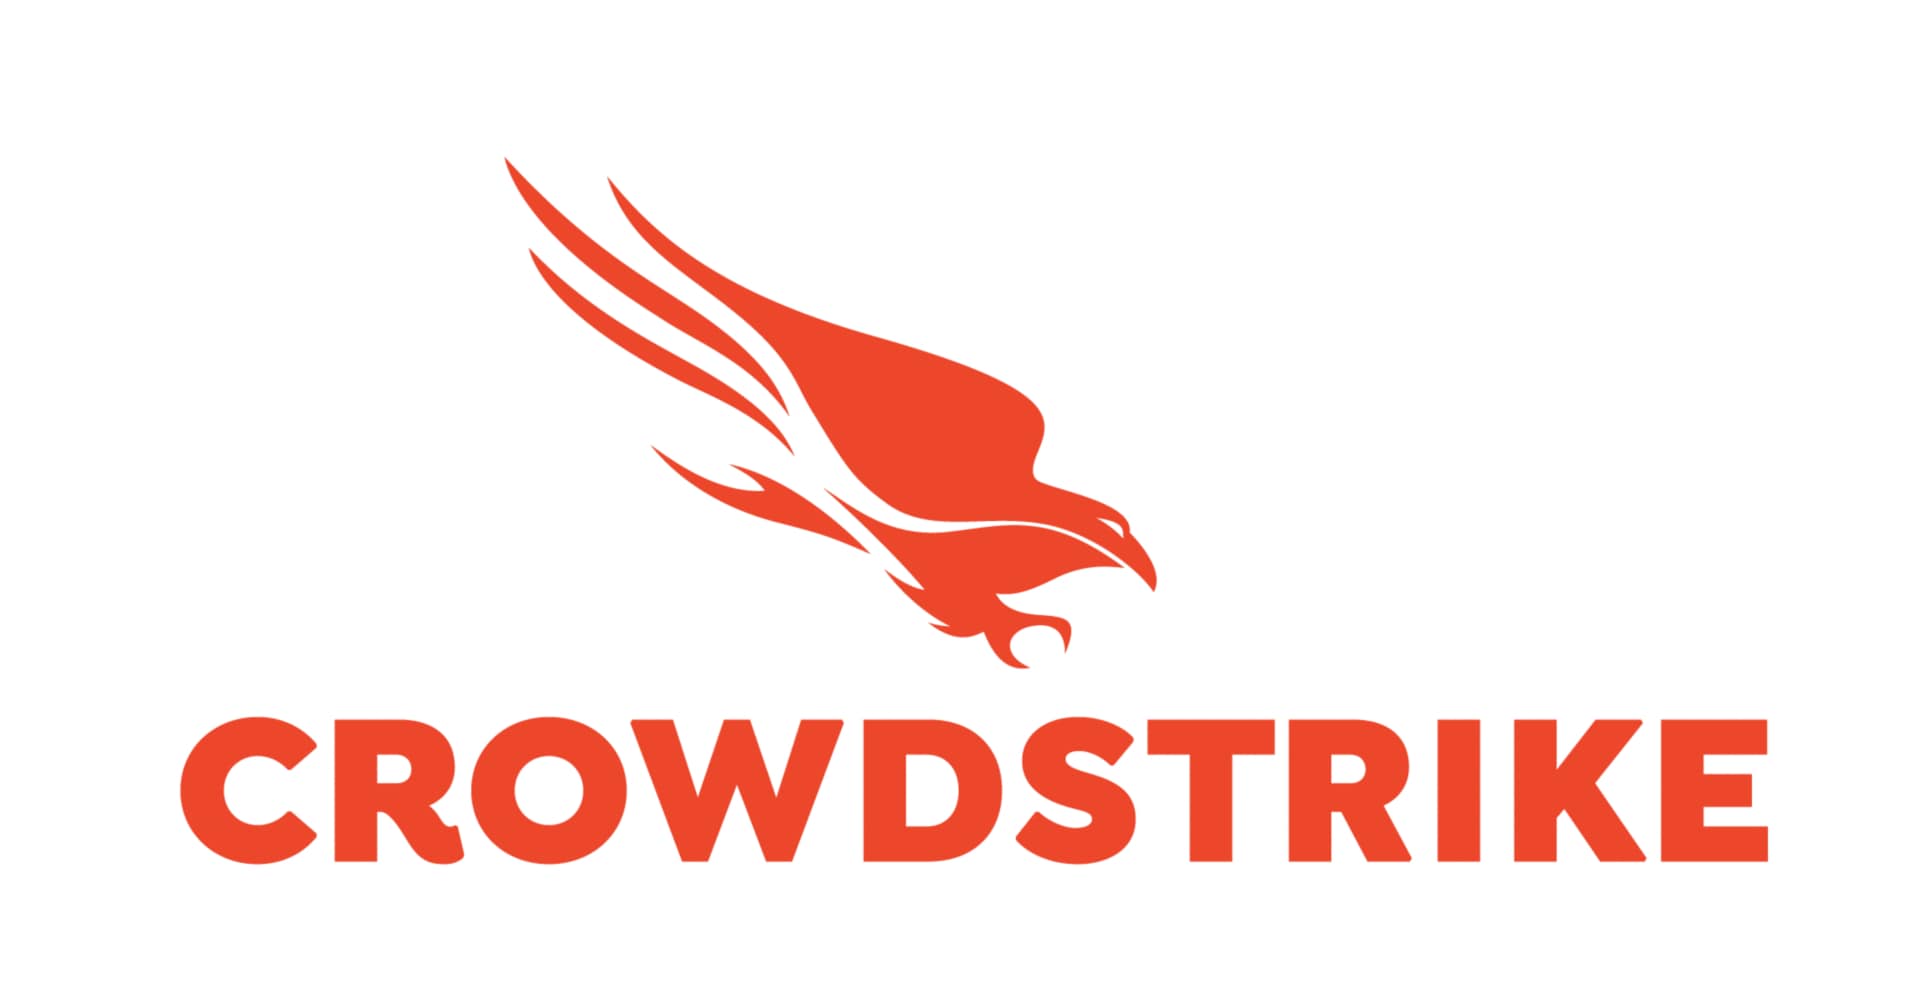 CrowdStrike Falcon Complete with Threat Graph Standard Software Subscription